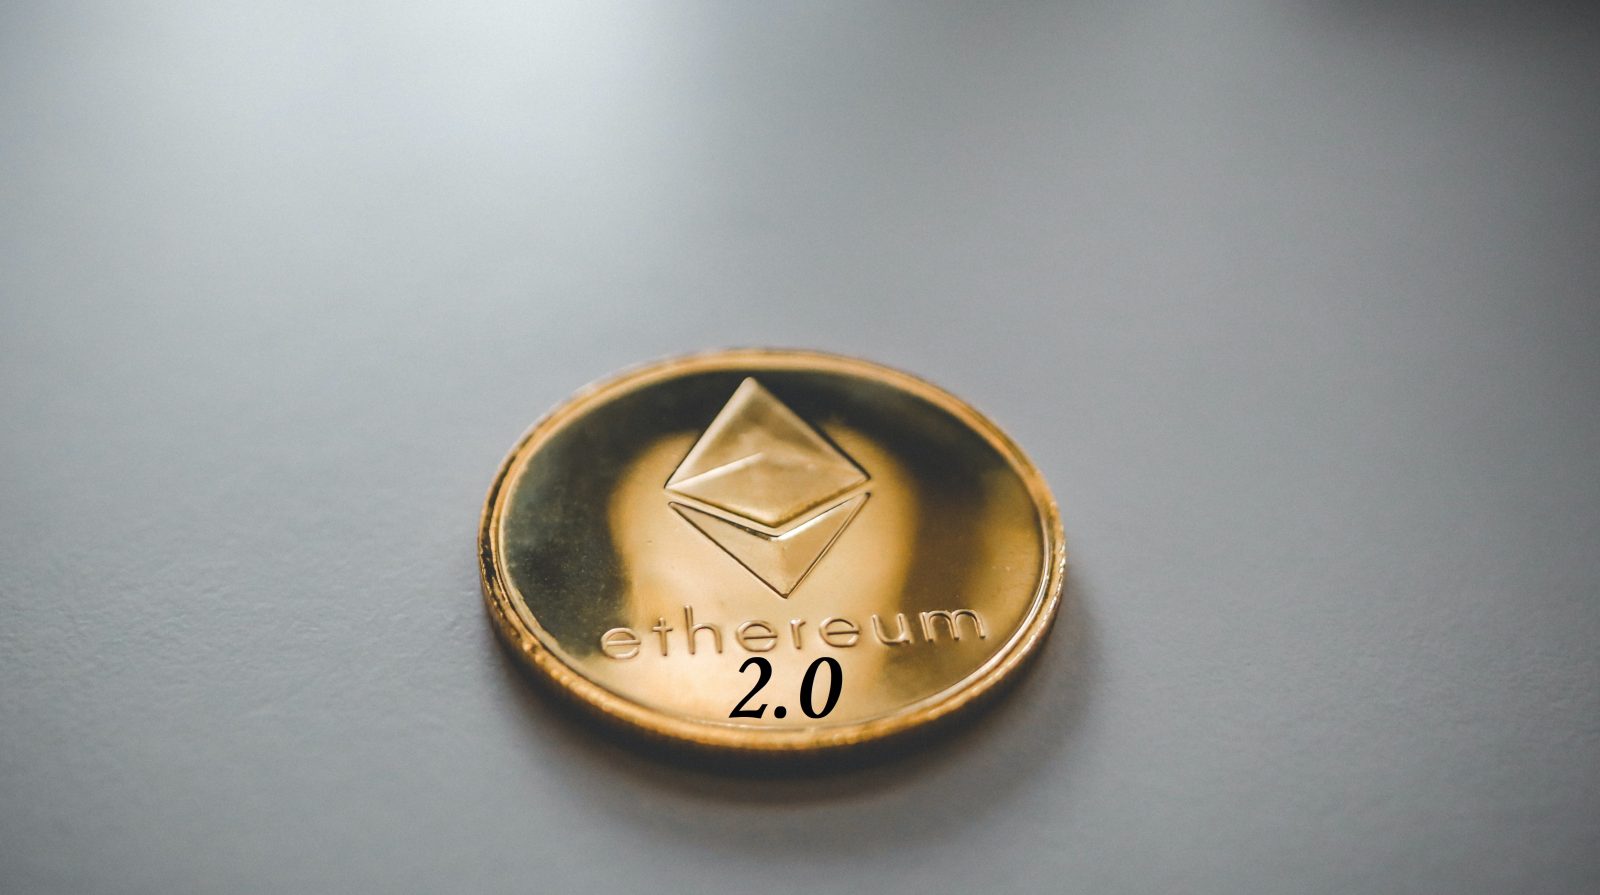 how to invest in ethereum 2.0